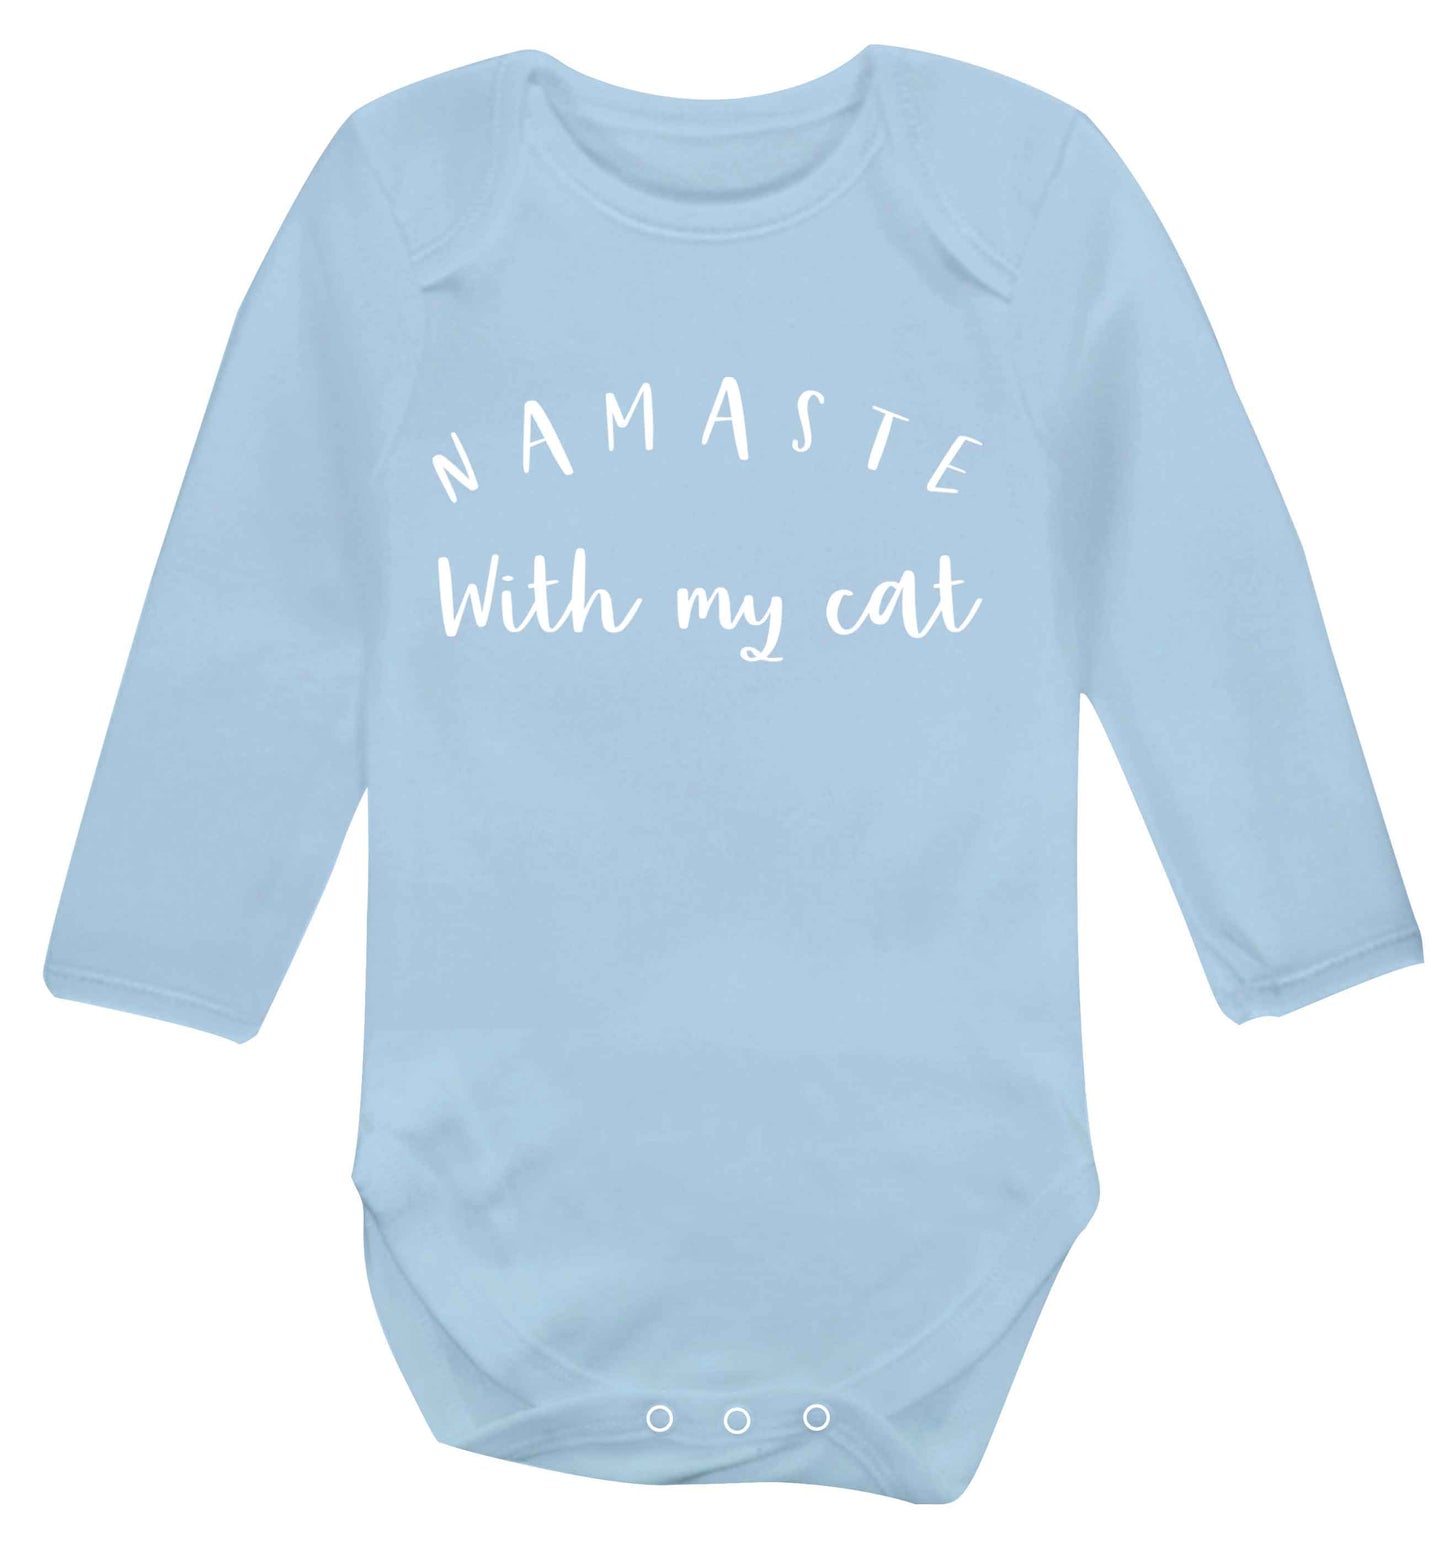 Namaste with my cat Baby Vest long sleeved pale blue 6-12 months